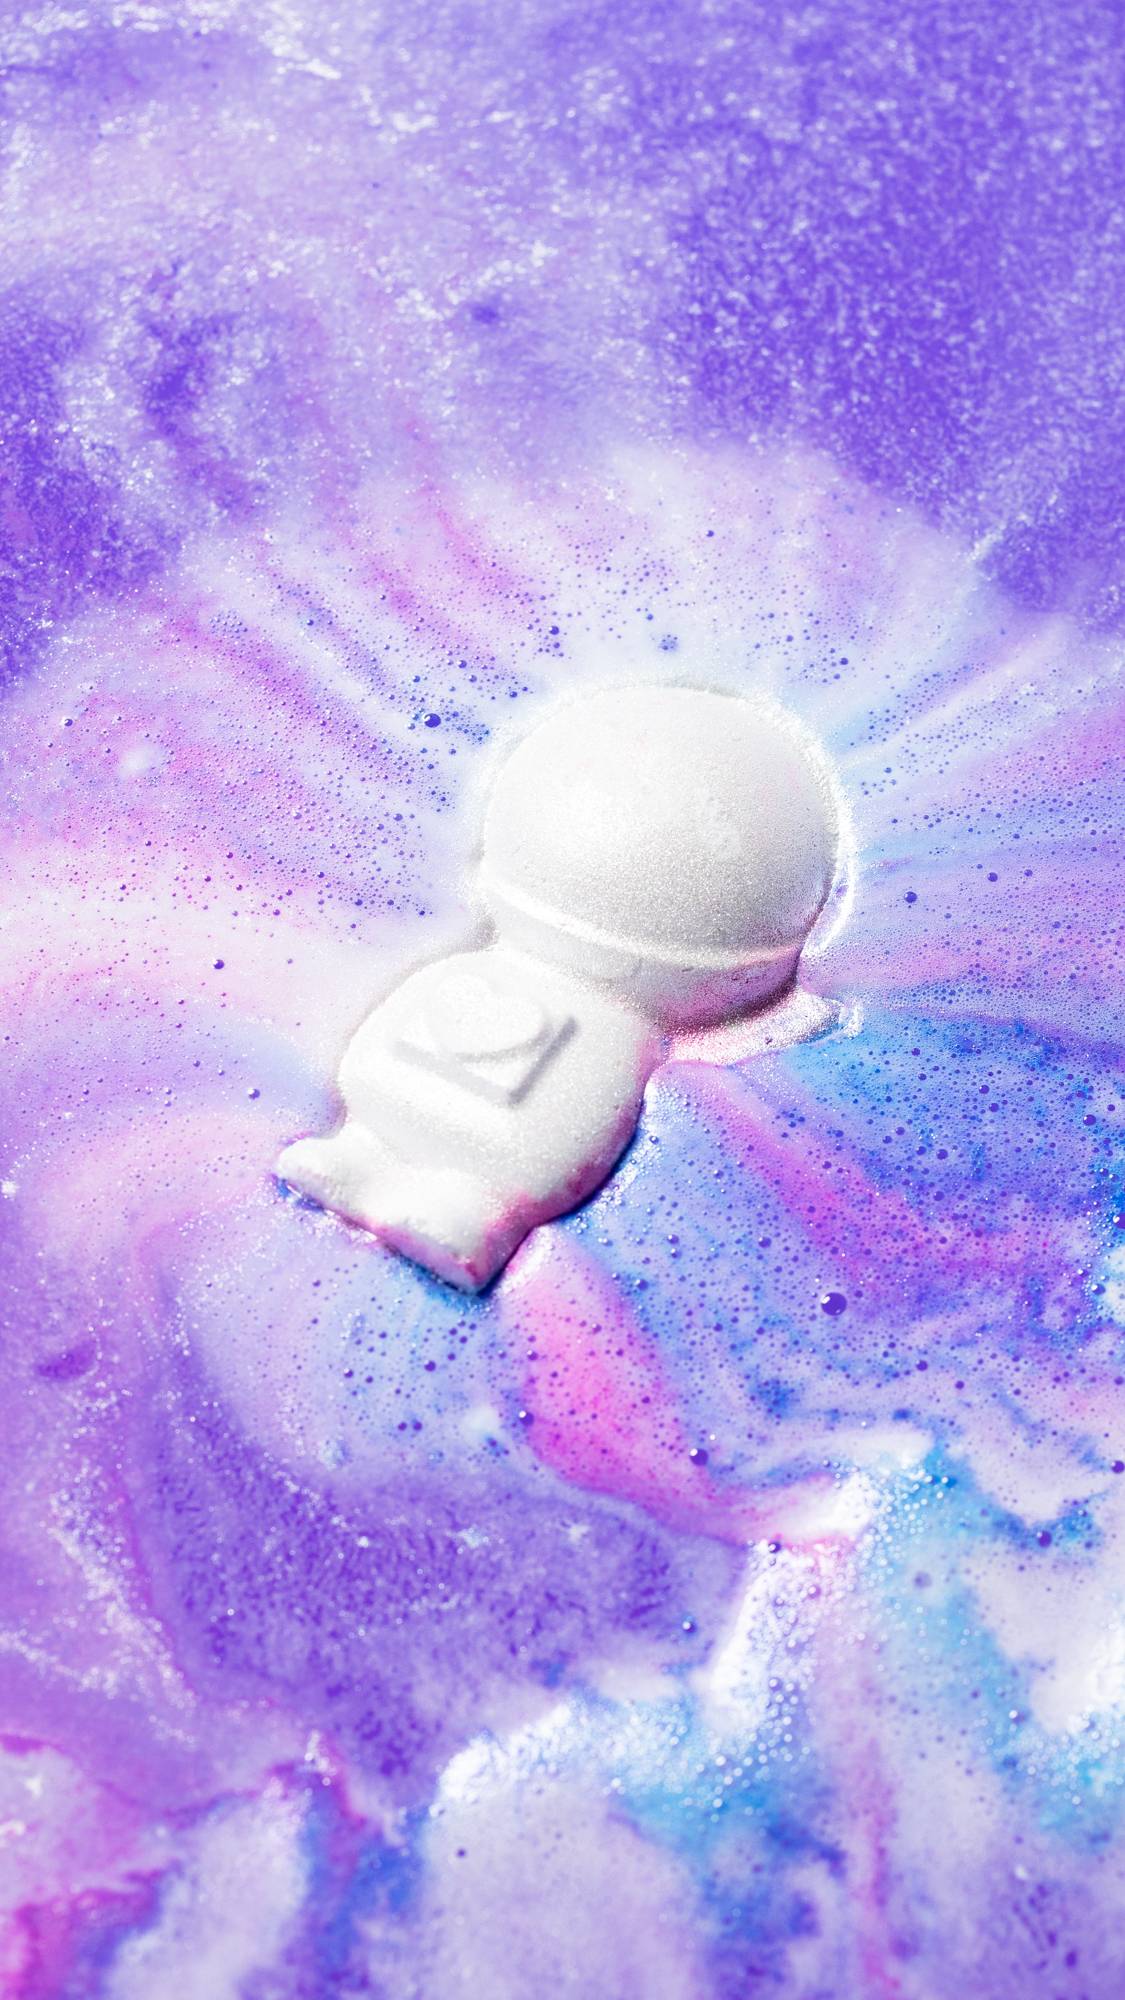 The Out of this World bath bomb sits in the water surrounded by thick, foamy swirls of pink, purple and blue.